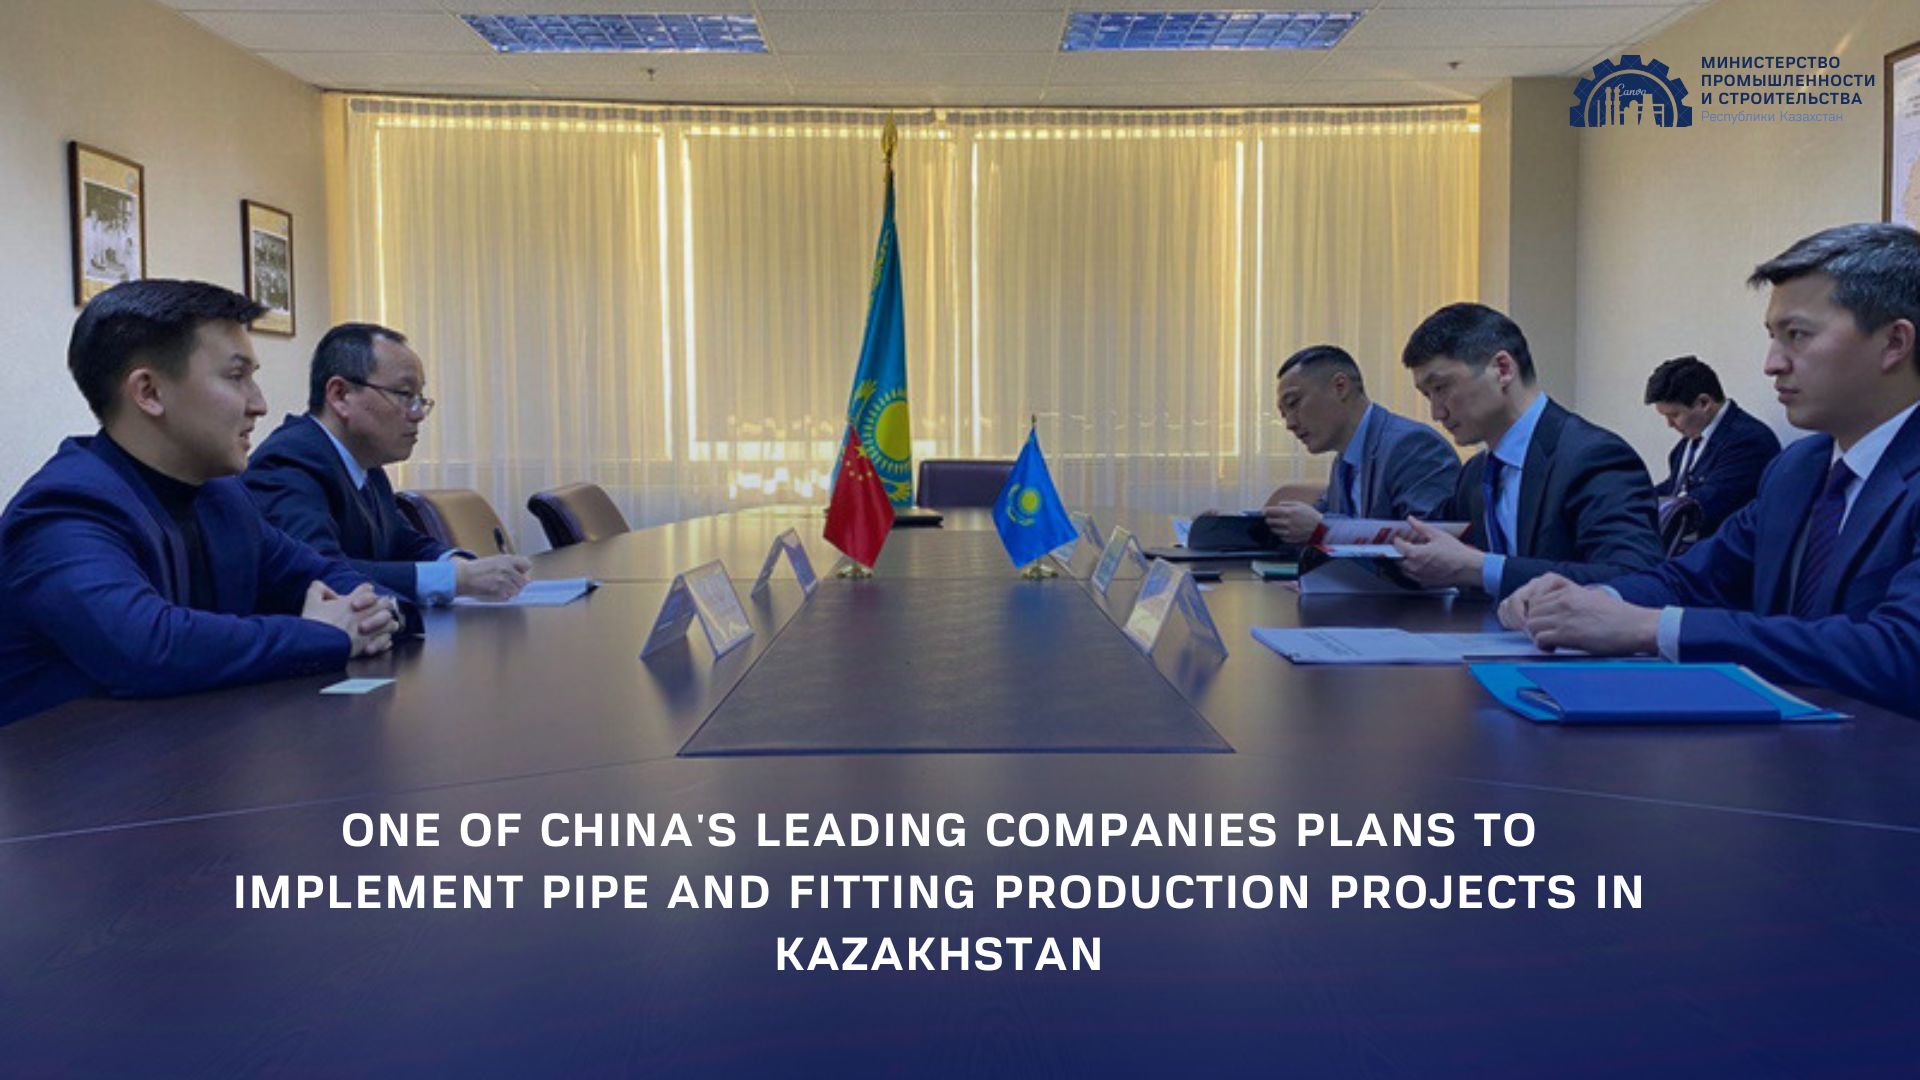 One of China's leading companies plans to implement pipe and fitting production projects in Kazakhstan